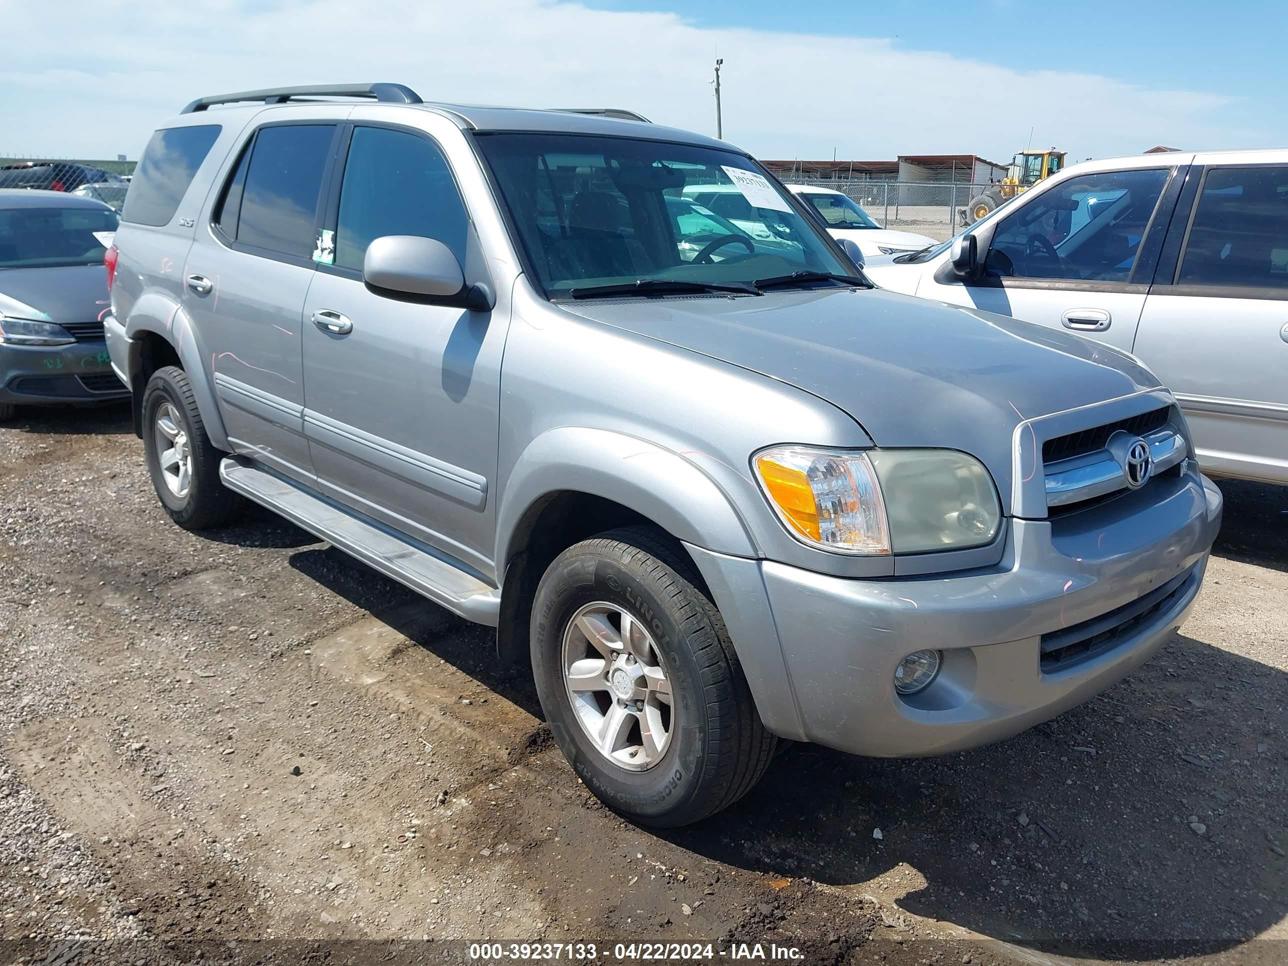 vin: 5TDBT44A95S257169 5TDBT44A95S257169 2005 toyota sequoia 4700 for Sale in 78616, 2191 Highway 21 West, Dale, Texas, USA